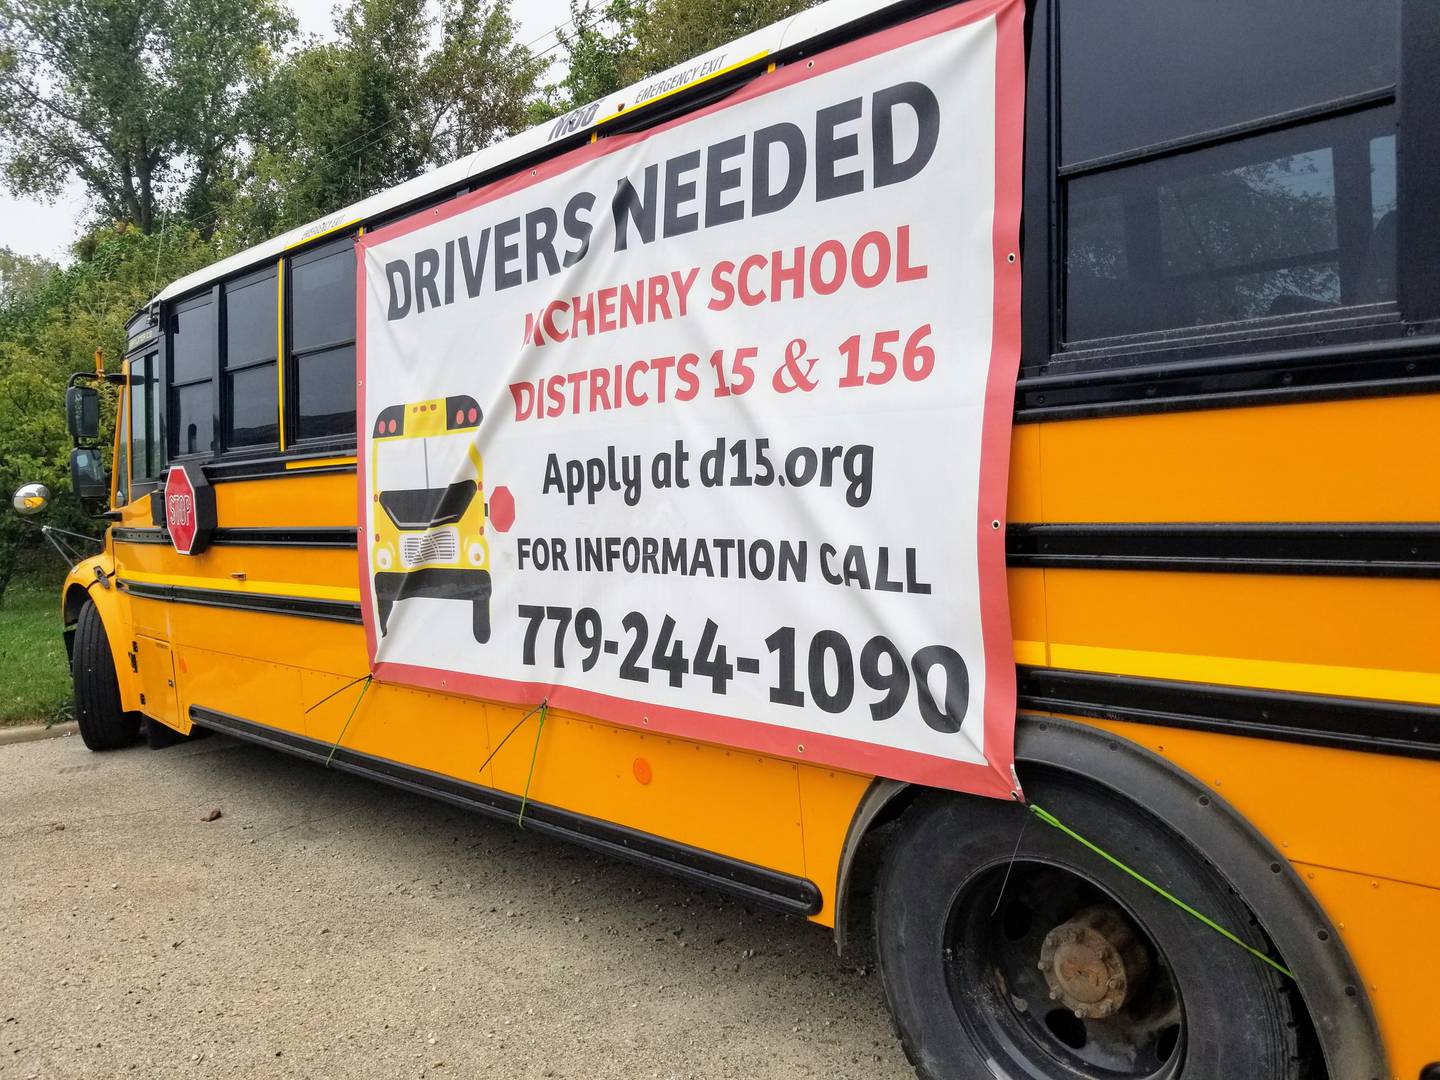 A banner advertising bus driver positions available with McHenry-based school districts is displayed along Route 120 in McHenry on Wednesday, Oct. 6, 2021.